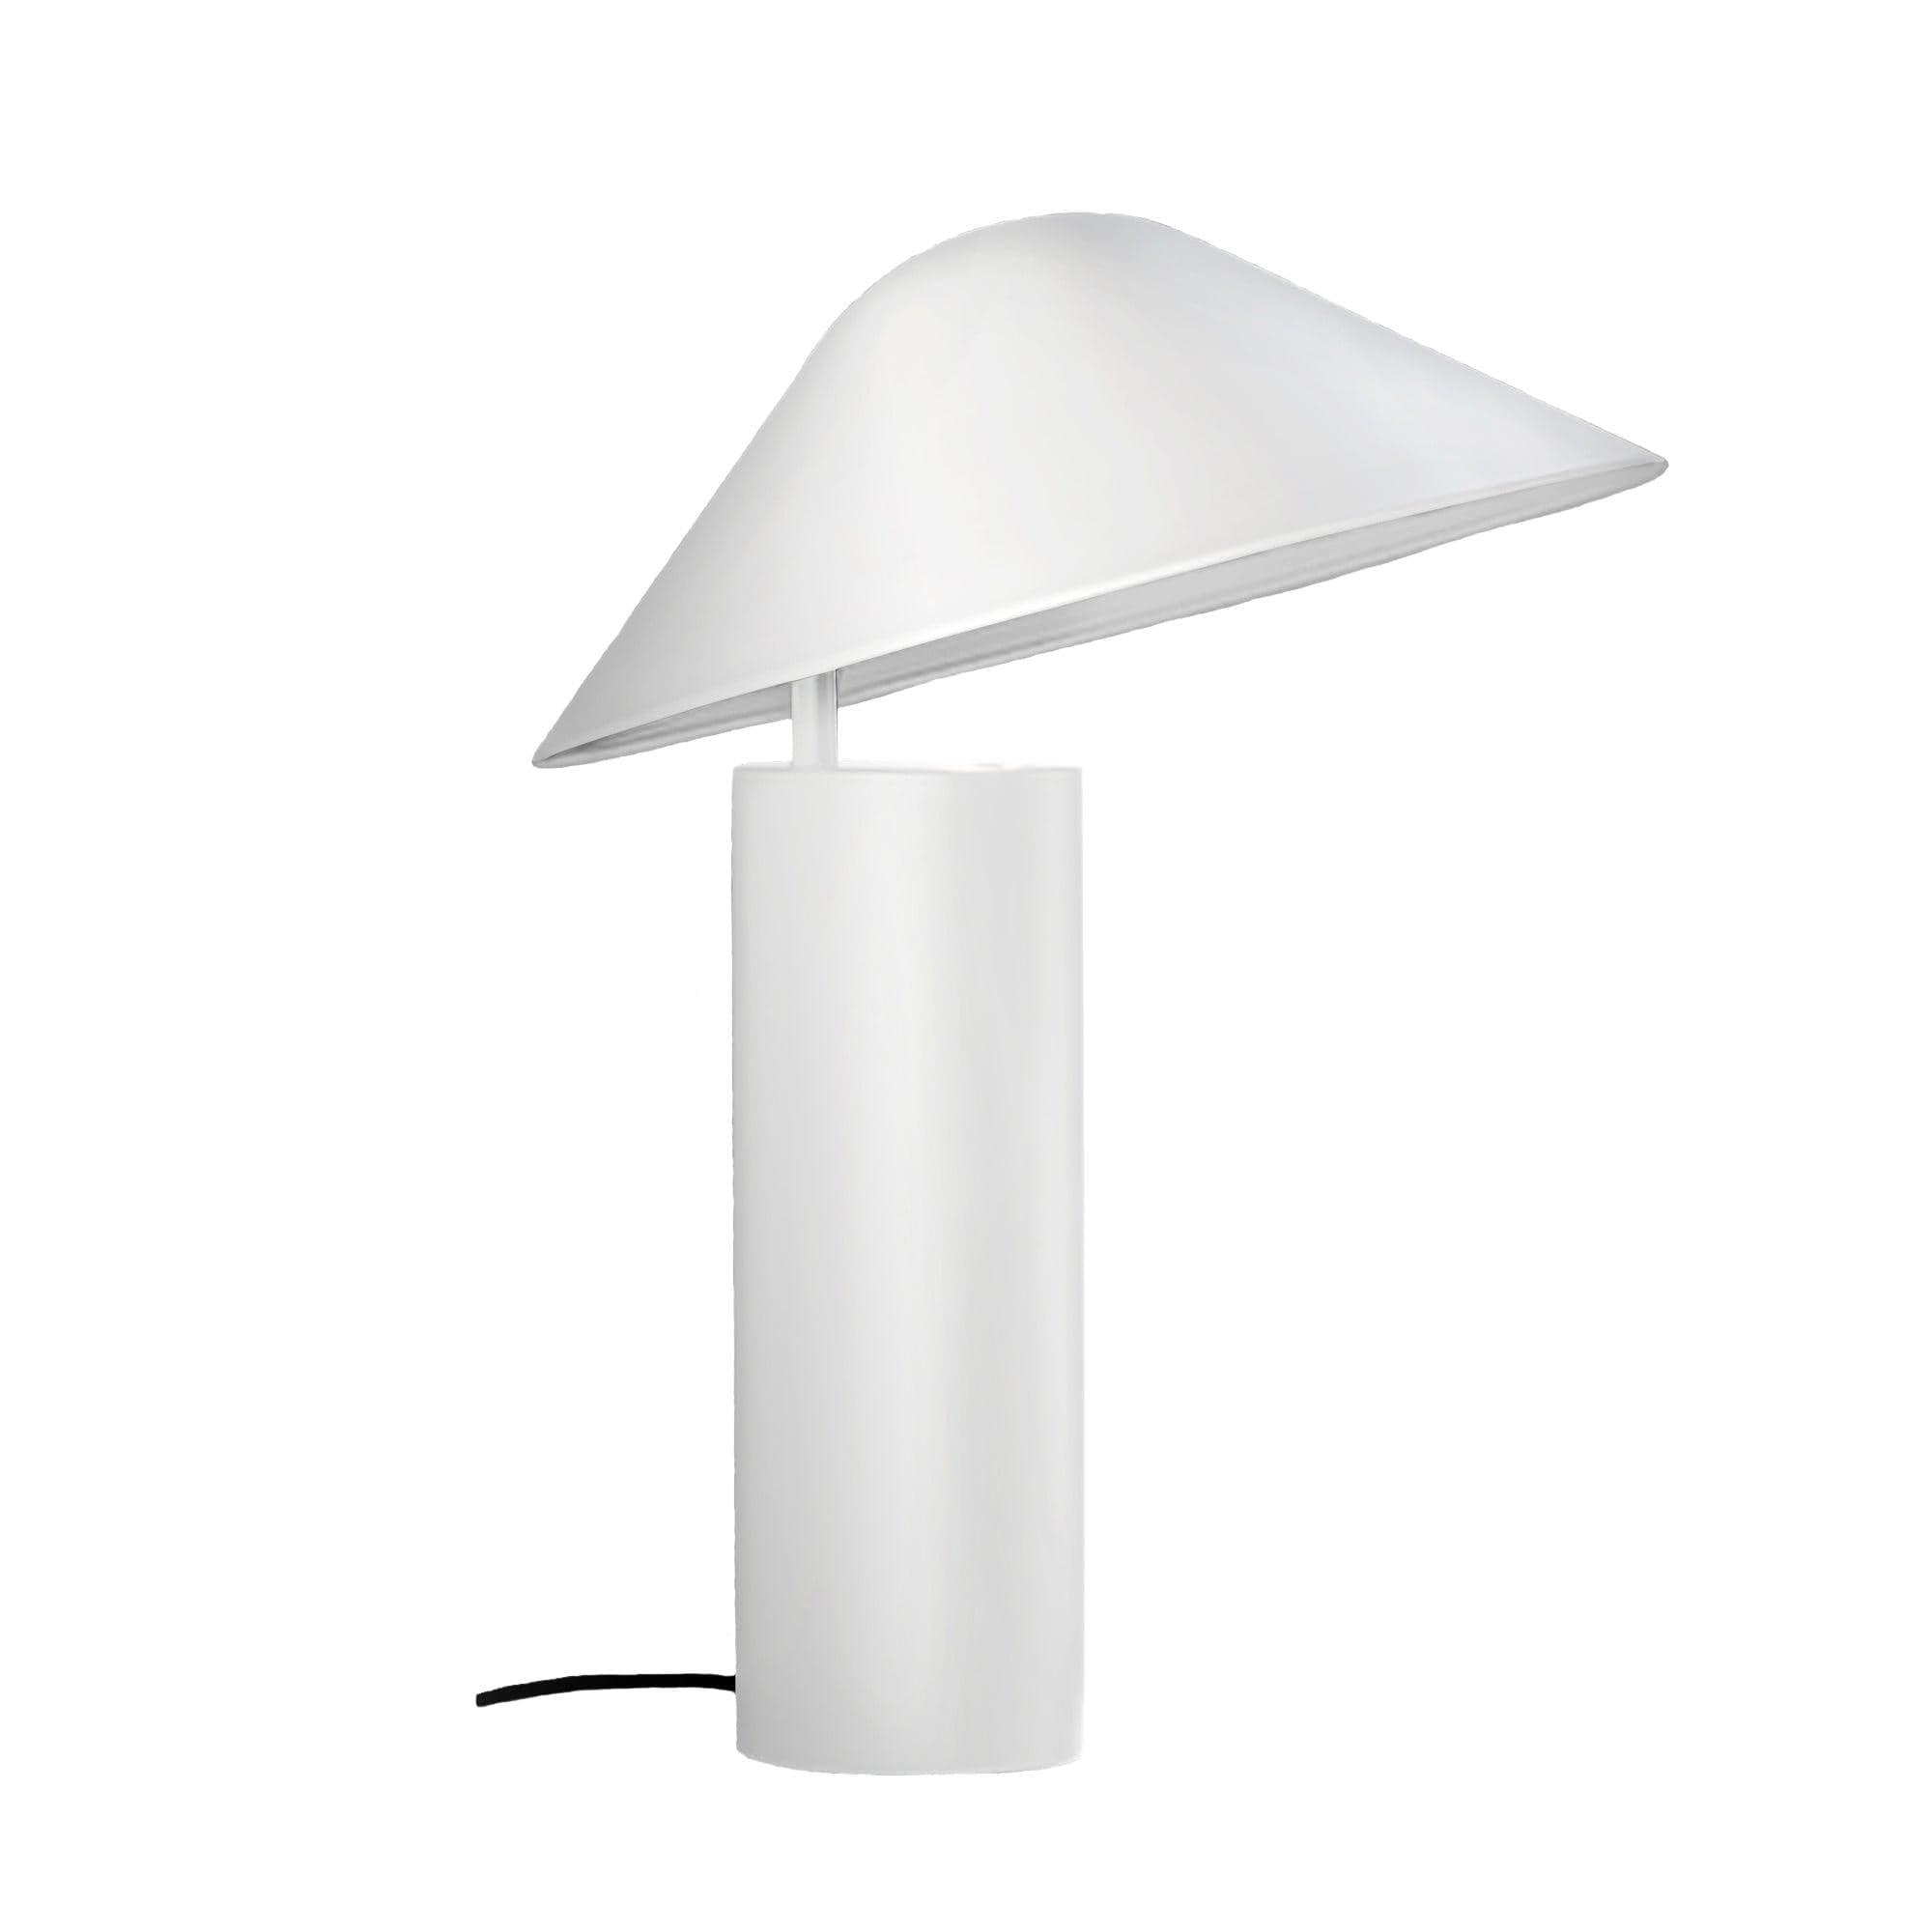 Seed Design - Damo Table Simple Lamp - SQ-339MDRS-WH | Montreal Lighting & Hardware